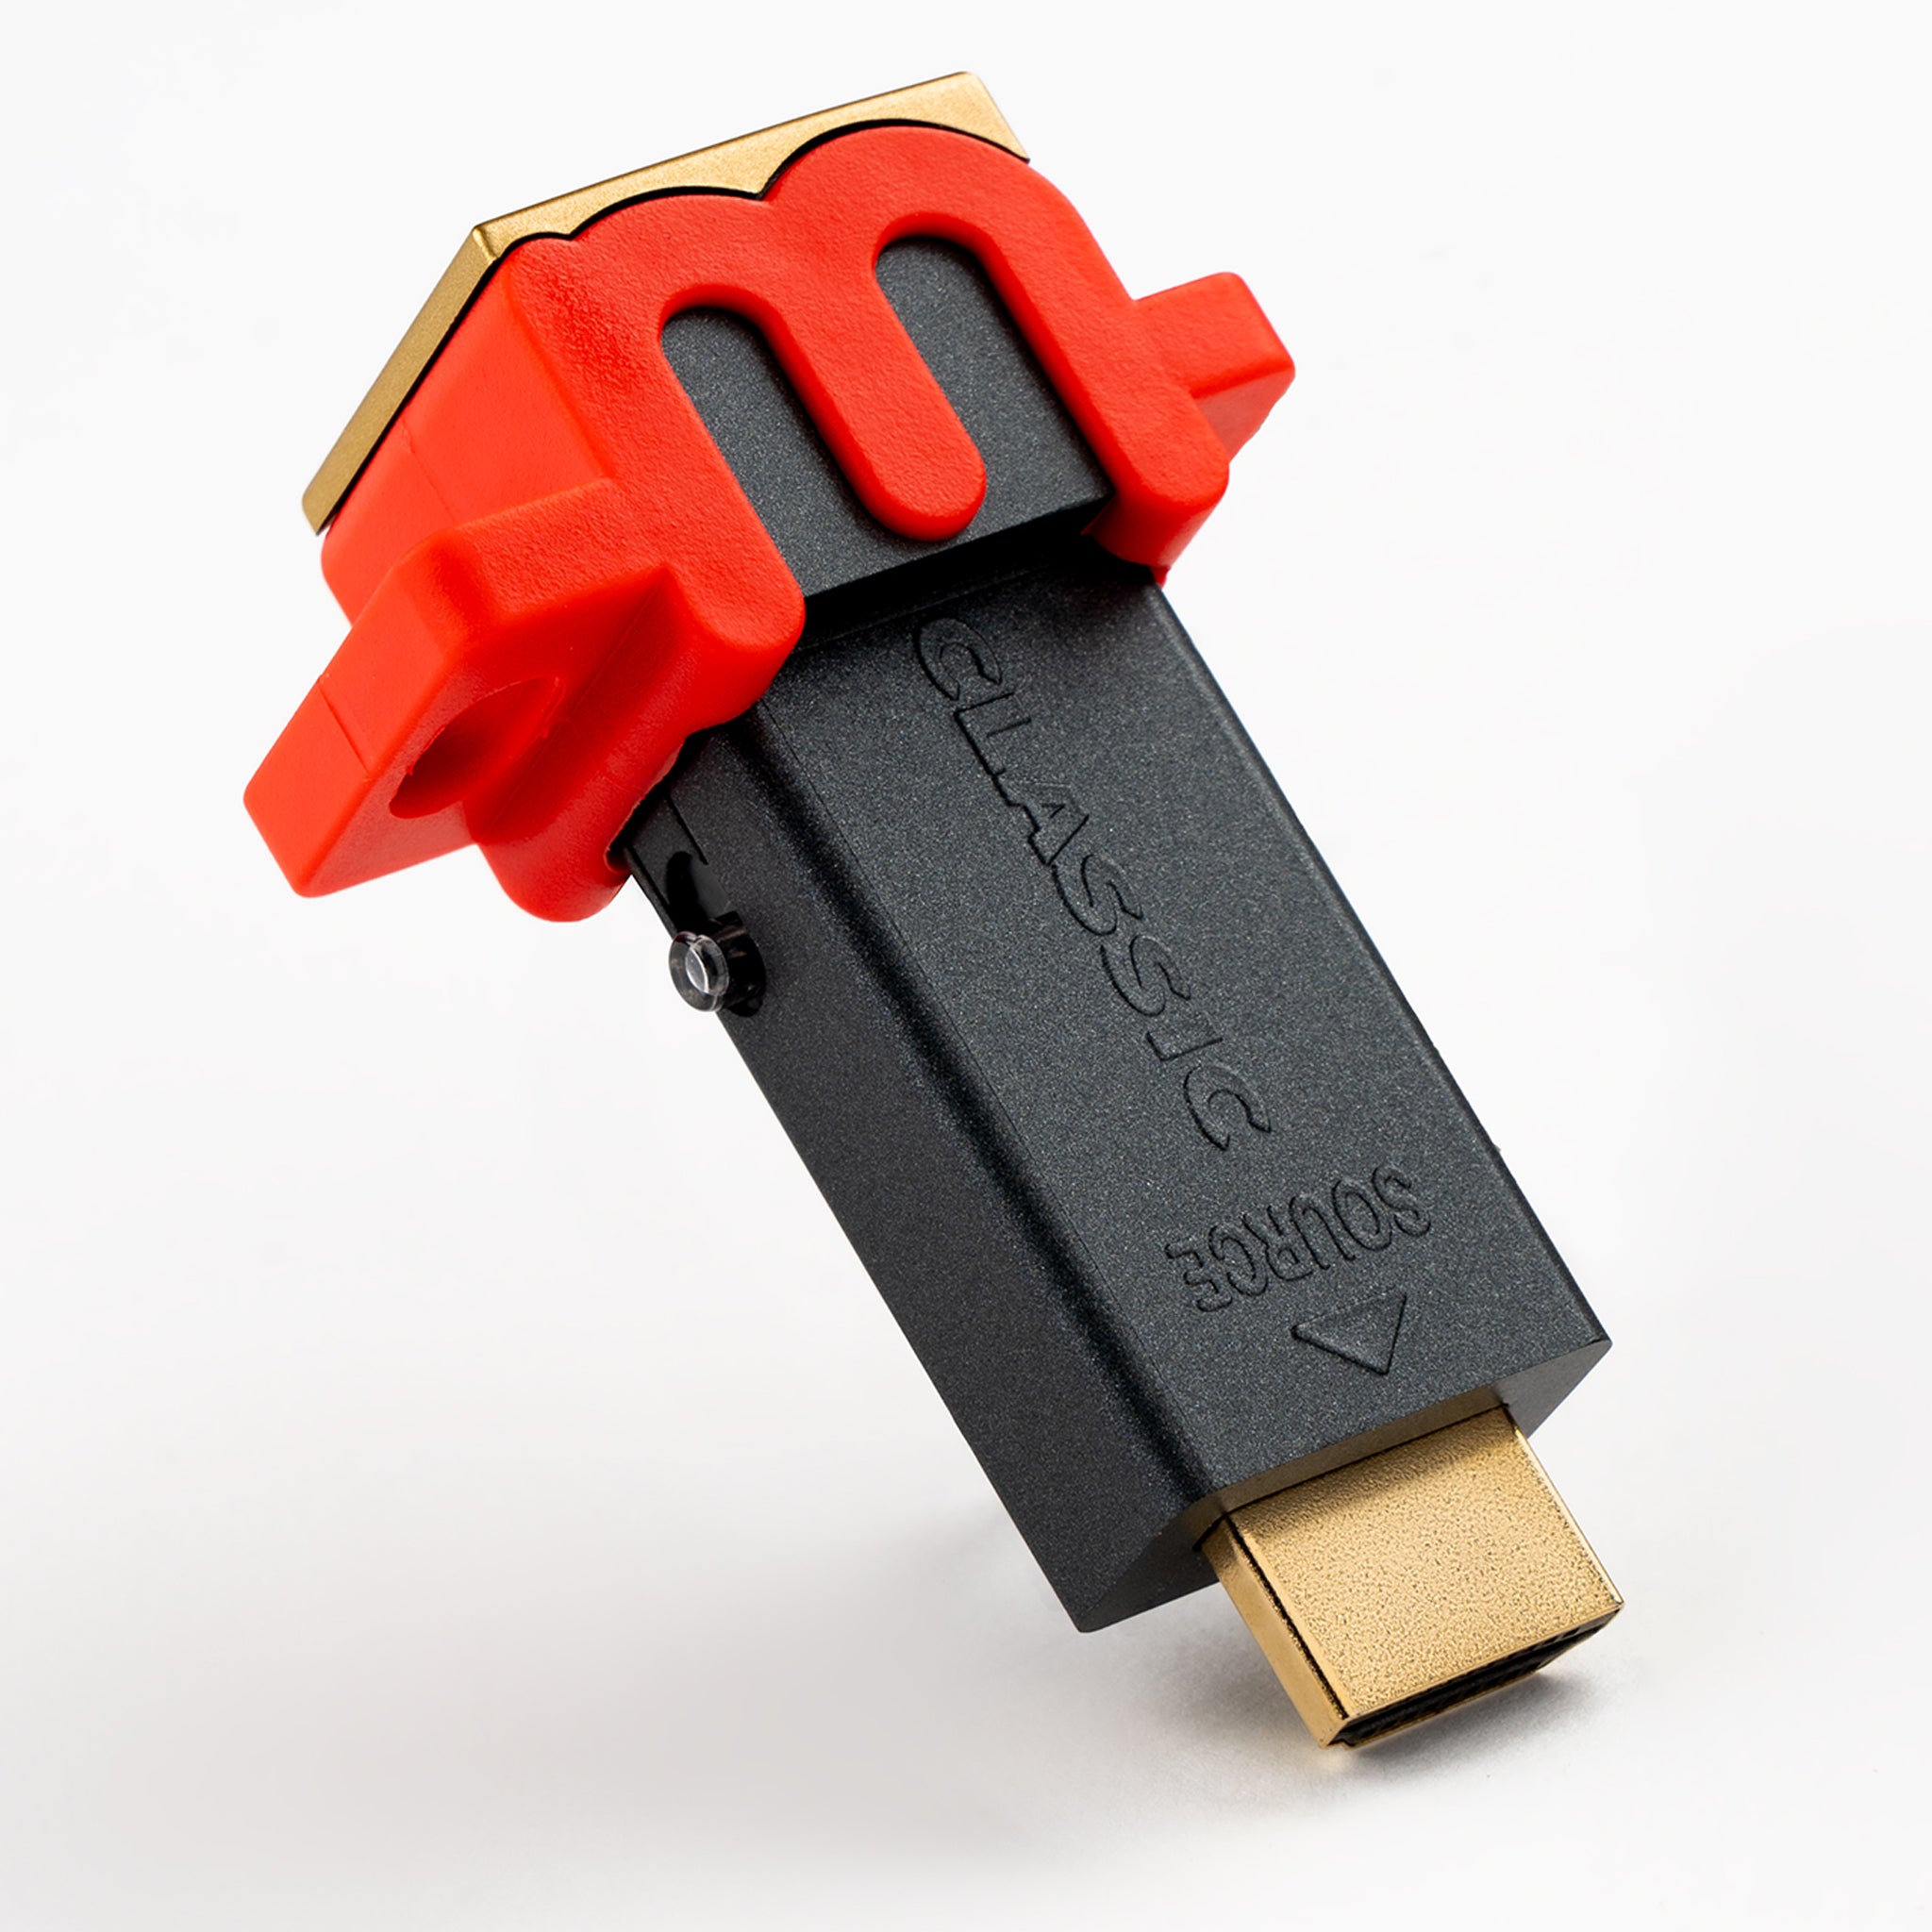 USB to Micro USB Archives - ERD Shoppe